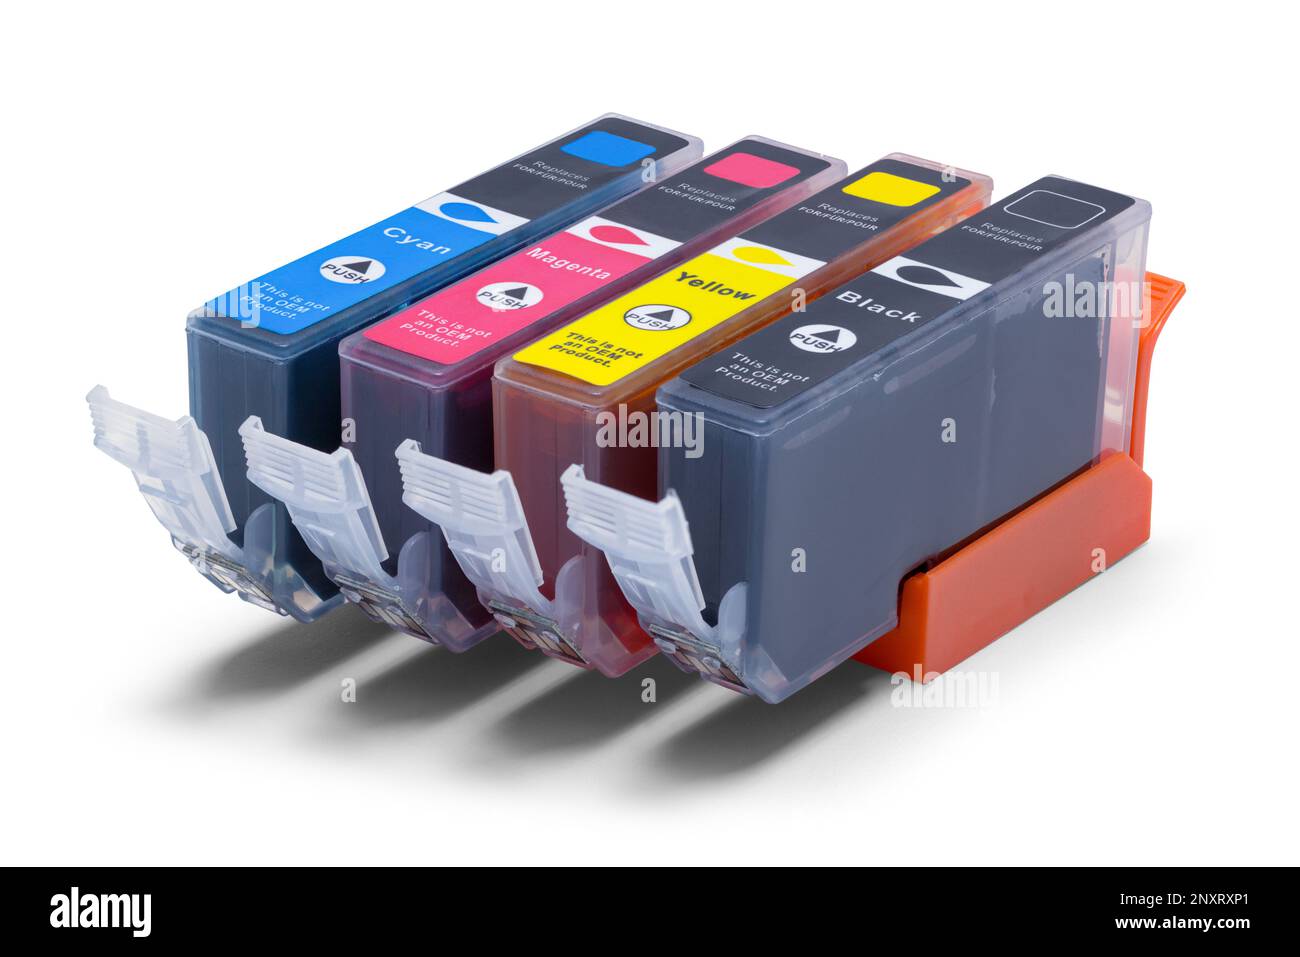 Computer Inkjet Cartridges Cut Out on White. Stock Photo